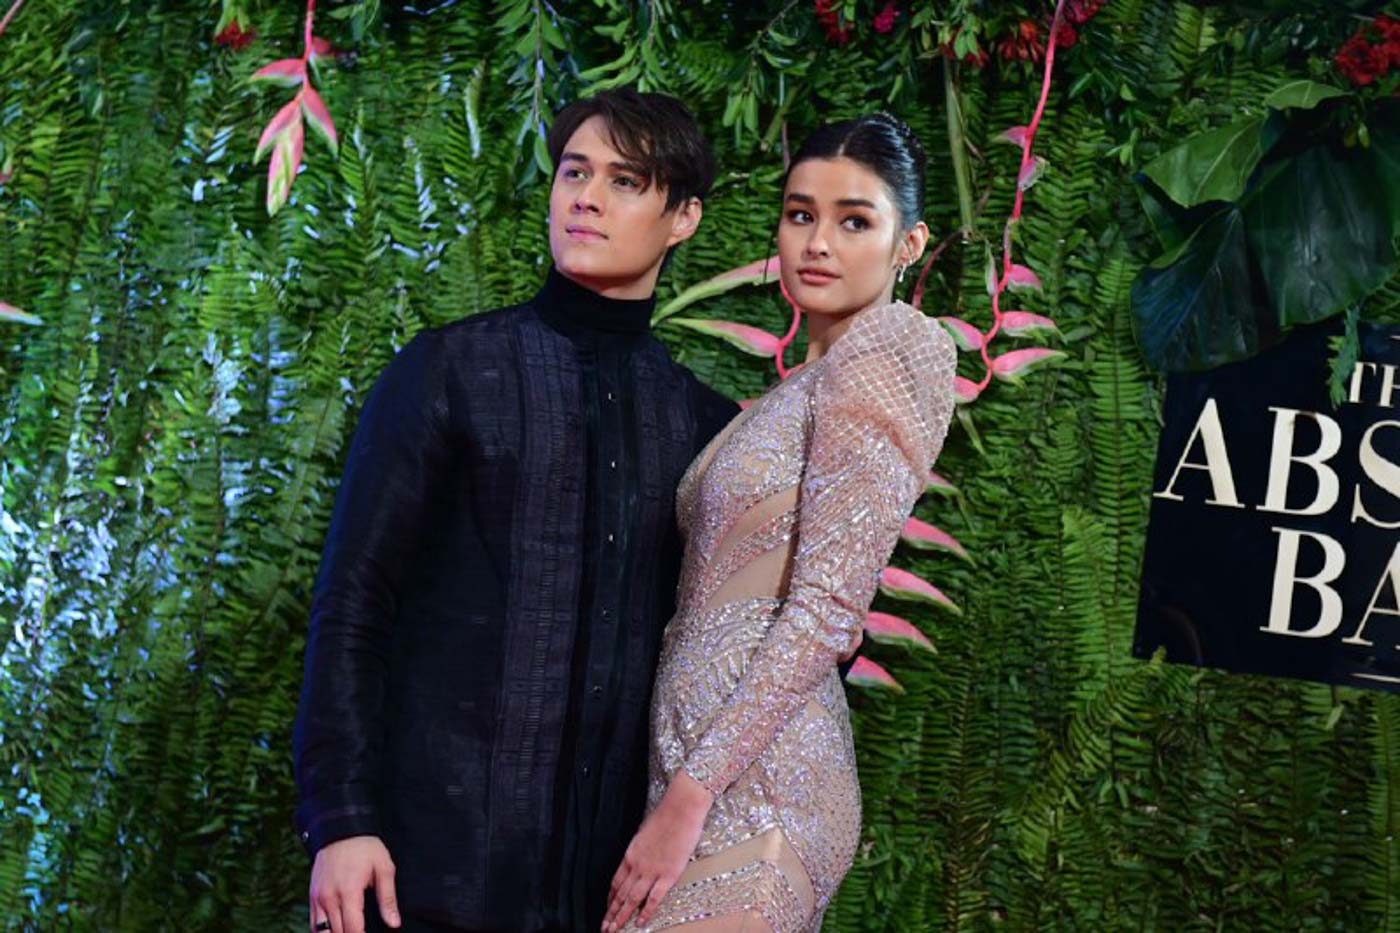 LOOK: Liza Soberano and Enrique Gil go understated glam at the ABS-CBN Ball 2019